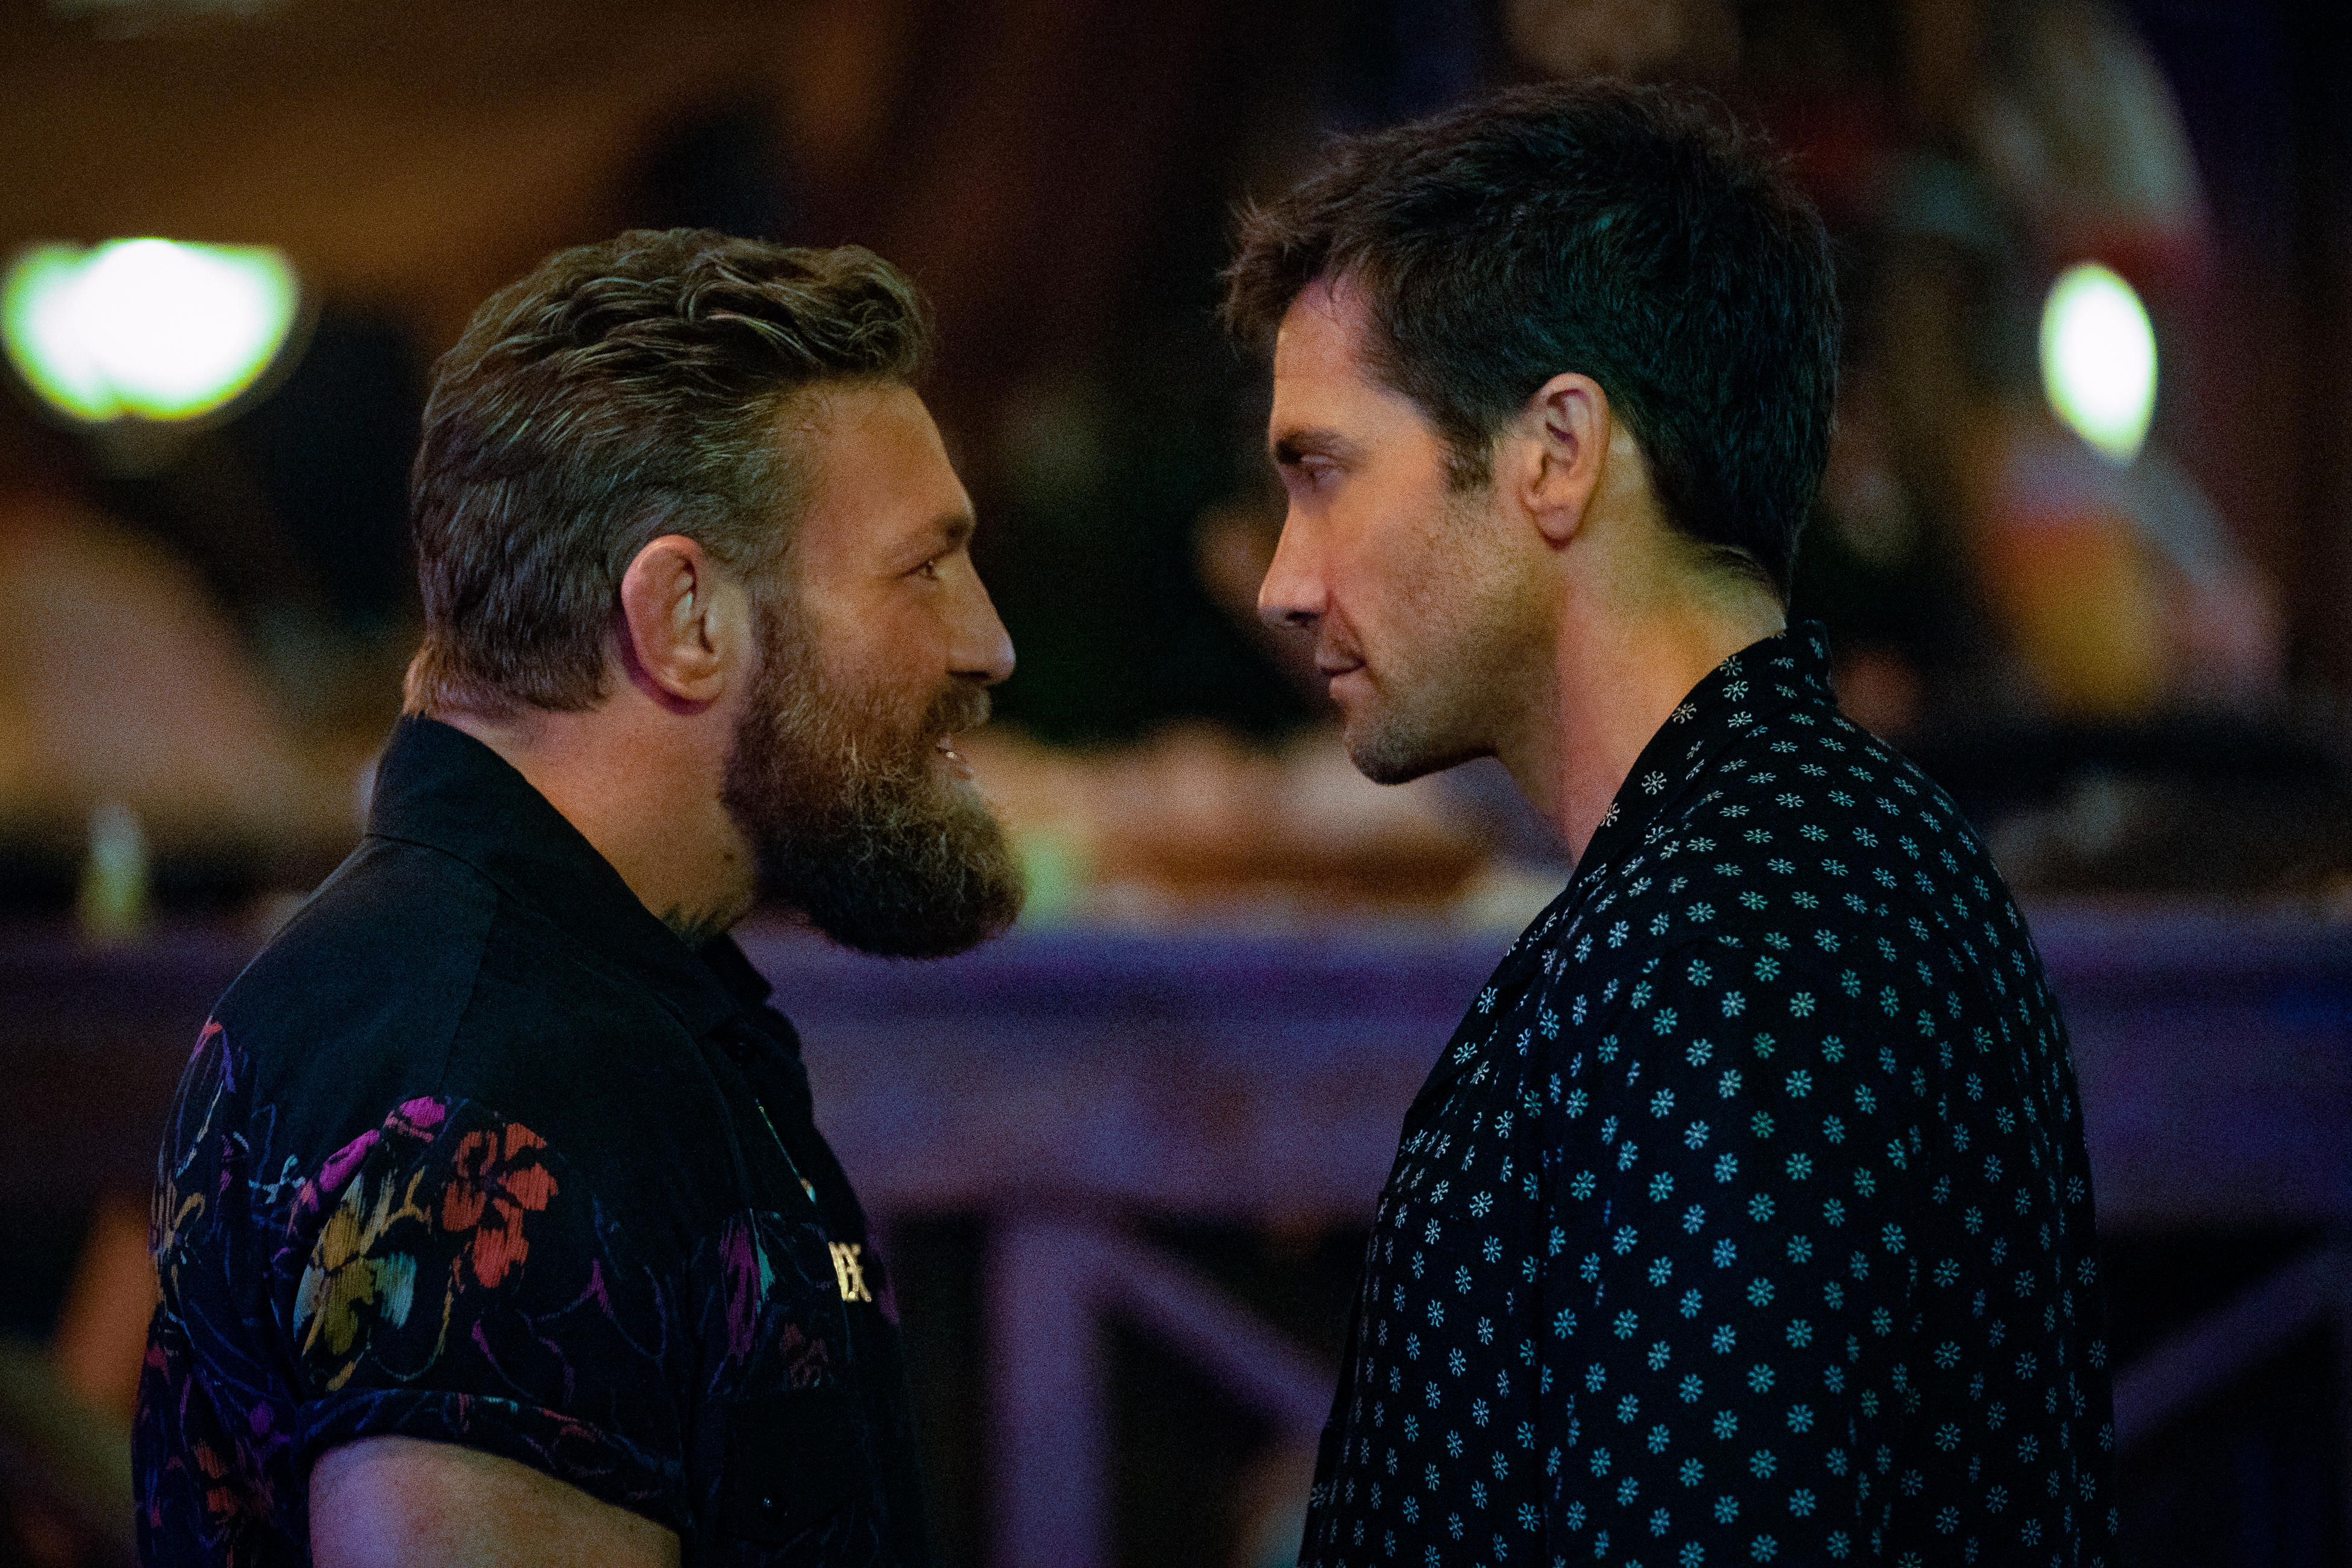 Jake Gyllenhaal and Conor McGregor in Road House (2024)